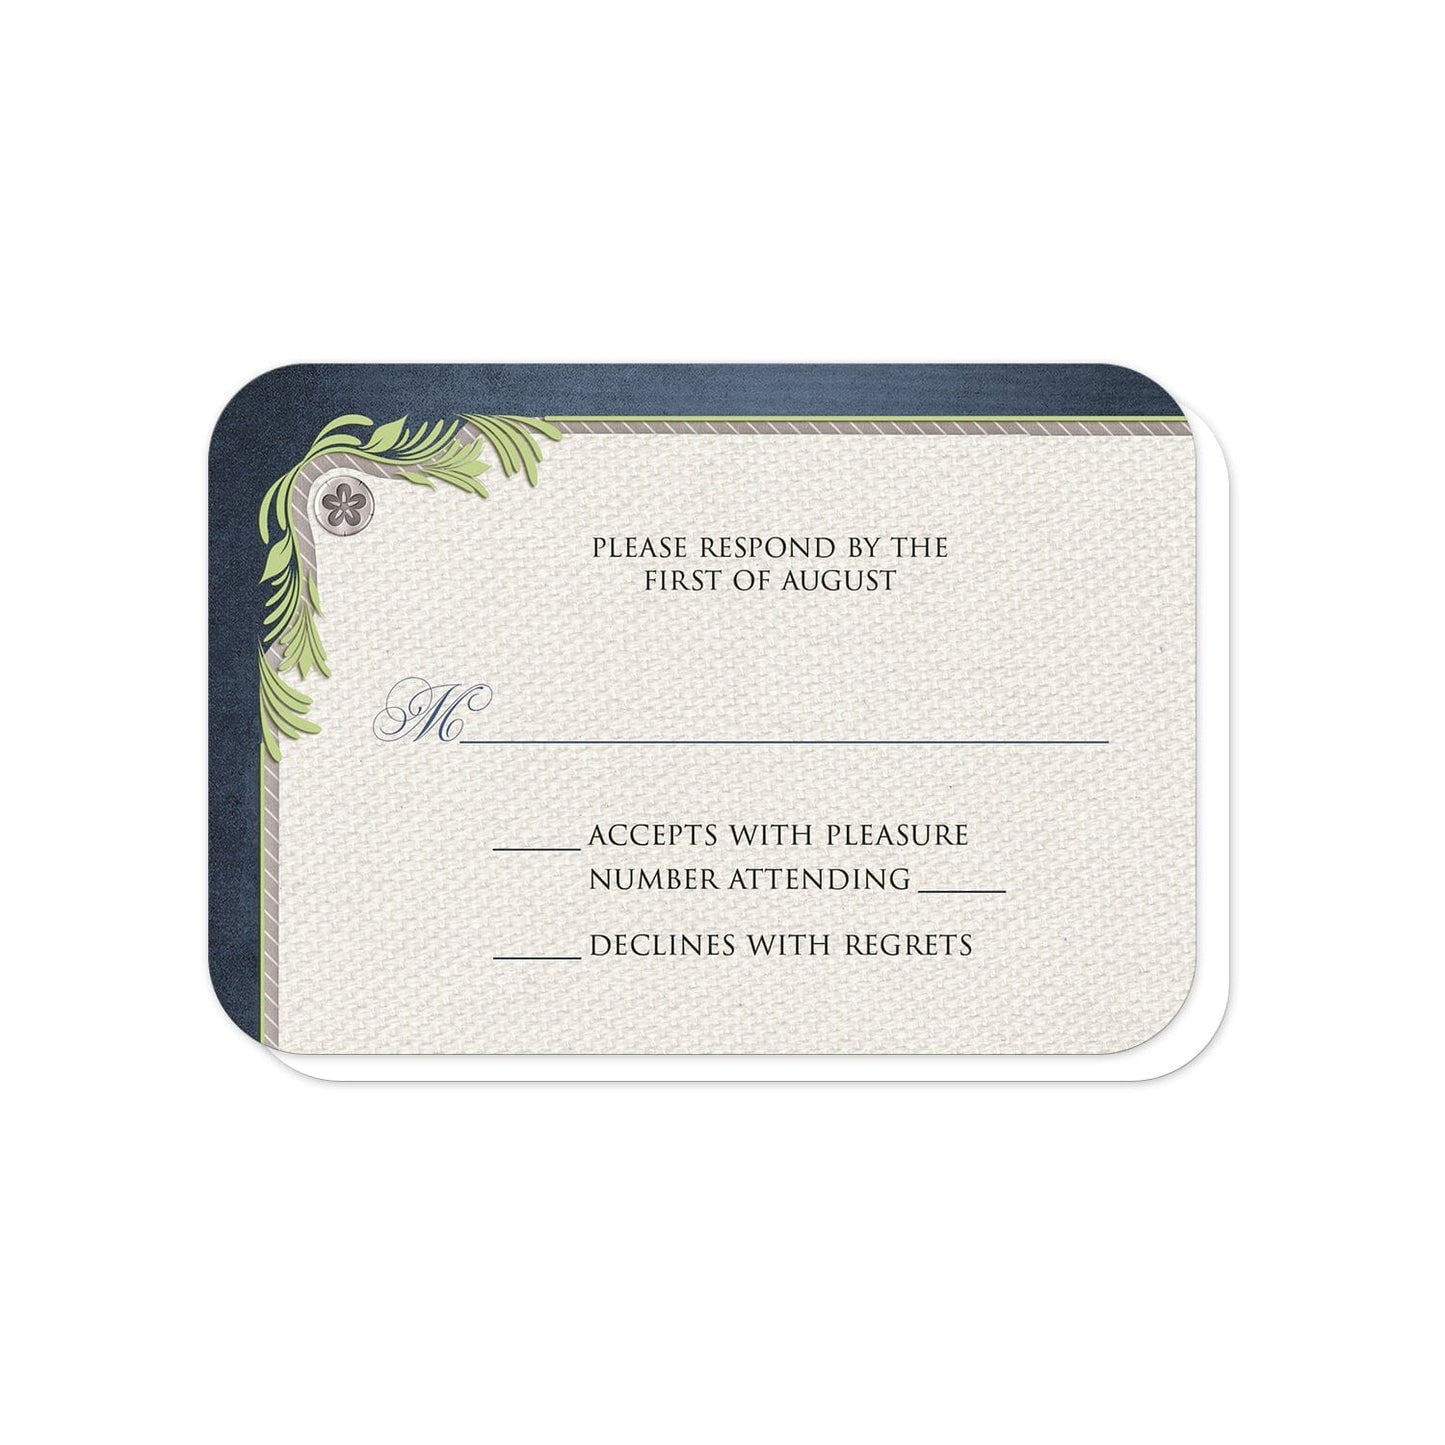 Rustic Succulent Garden Navy RSVP Cards (with rounded corners) at Artistically Invited.